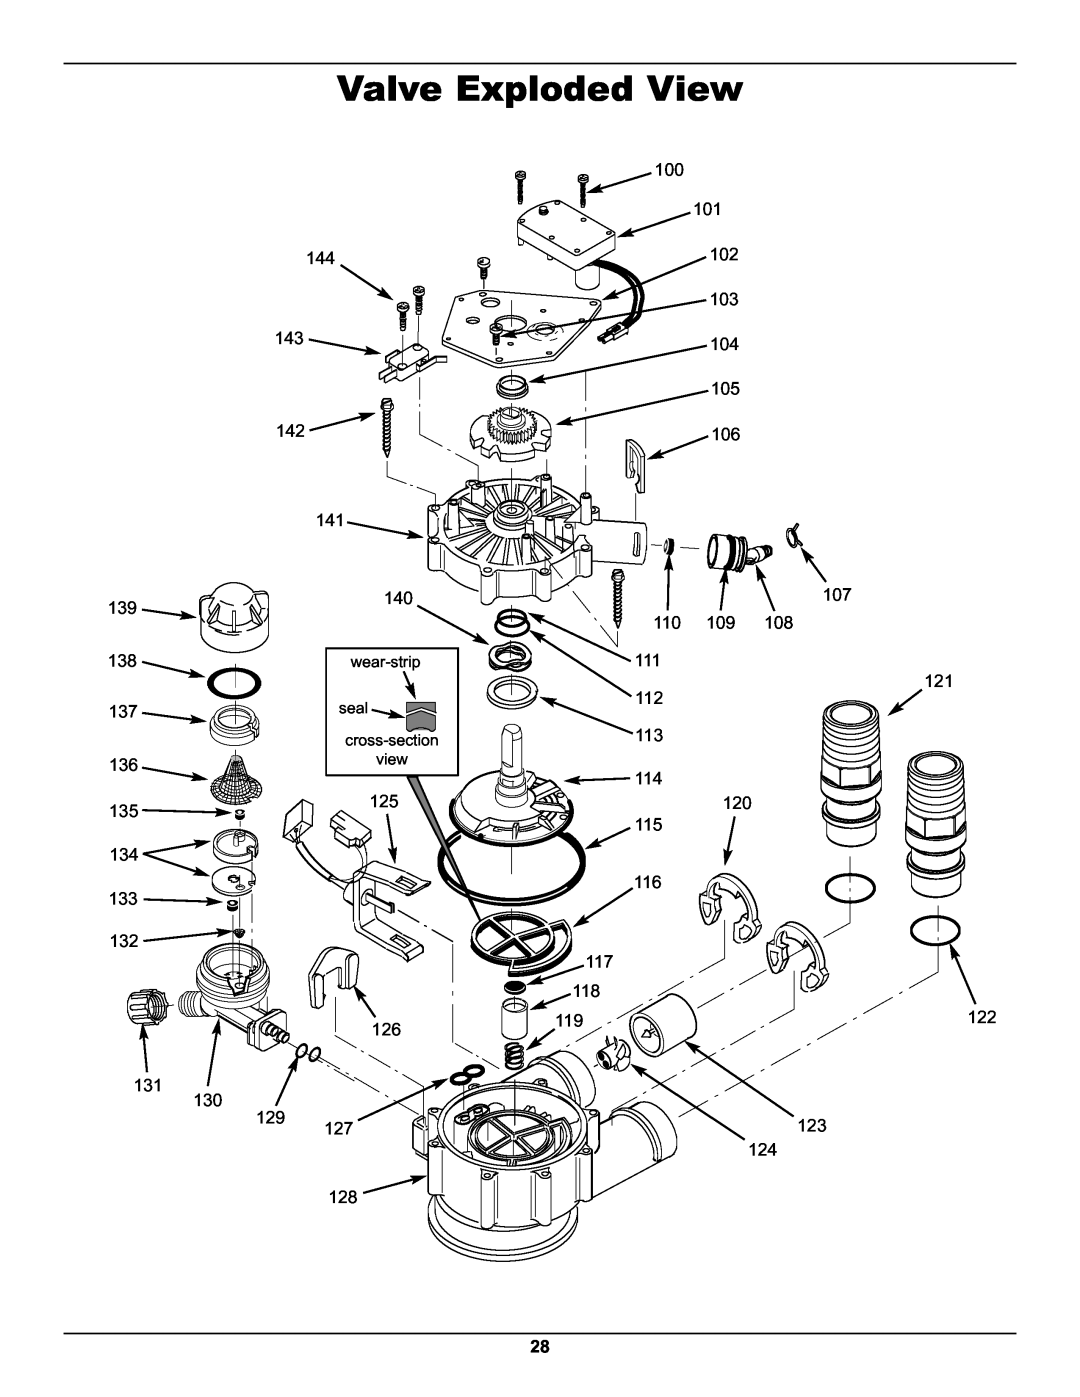 Whirlpool WHES48 operation manual Valve Exploded View, seal, cross-section, view 